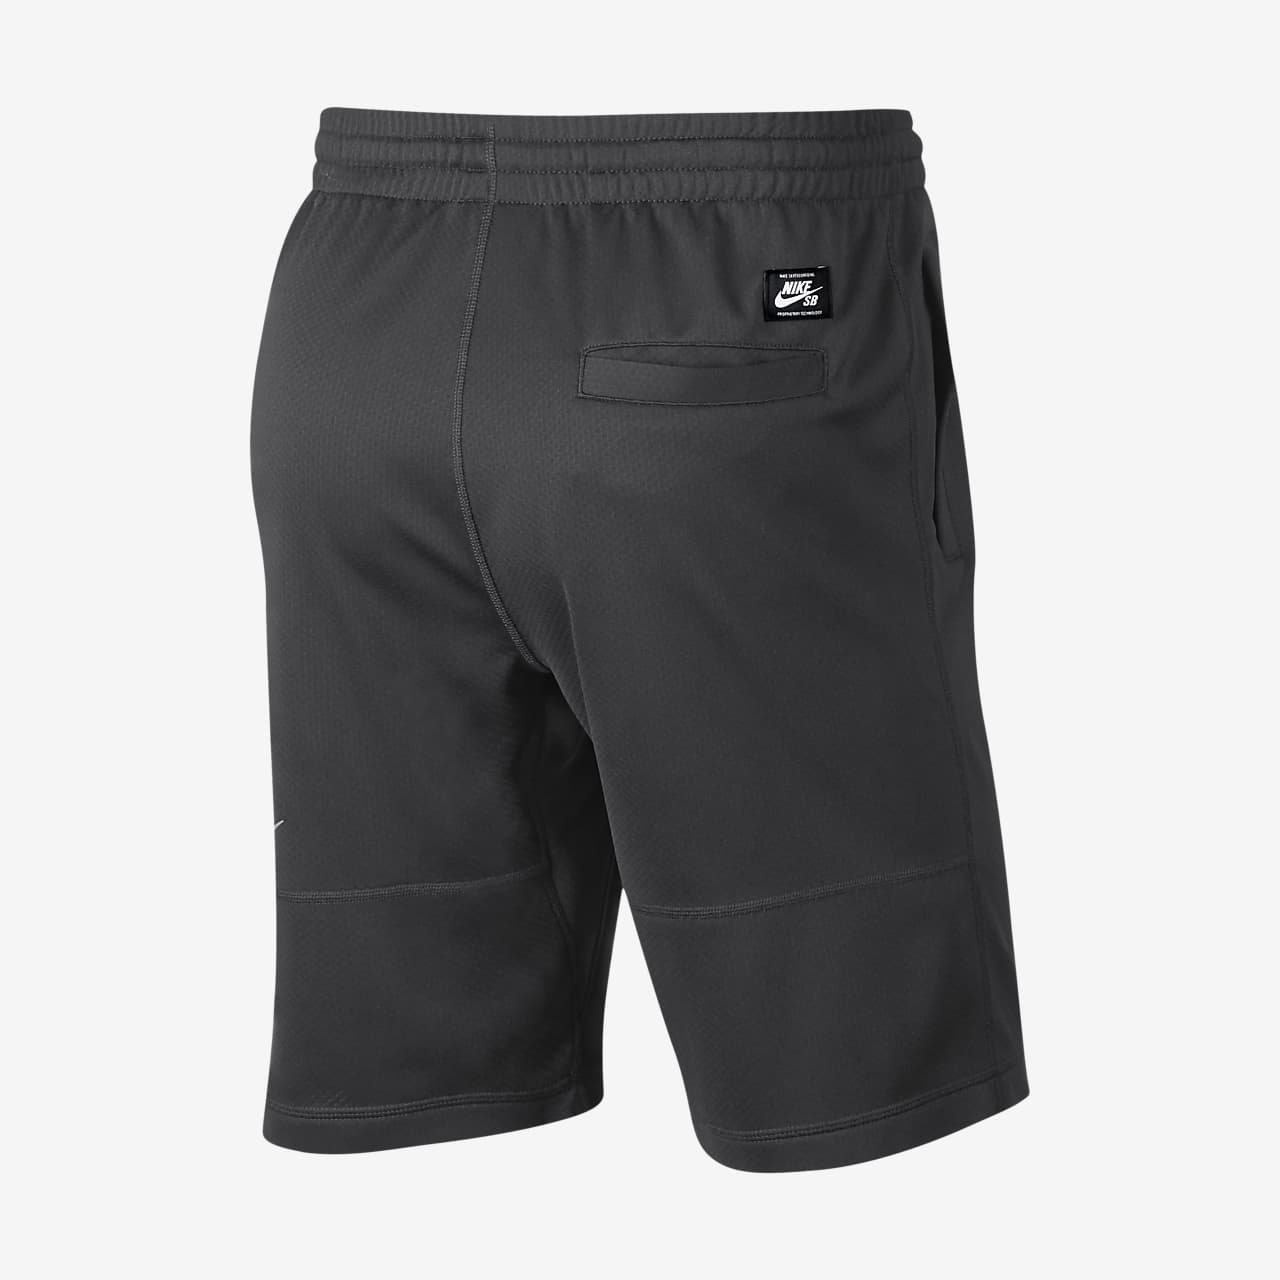 Buy > nike fit dry shorts > in stock